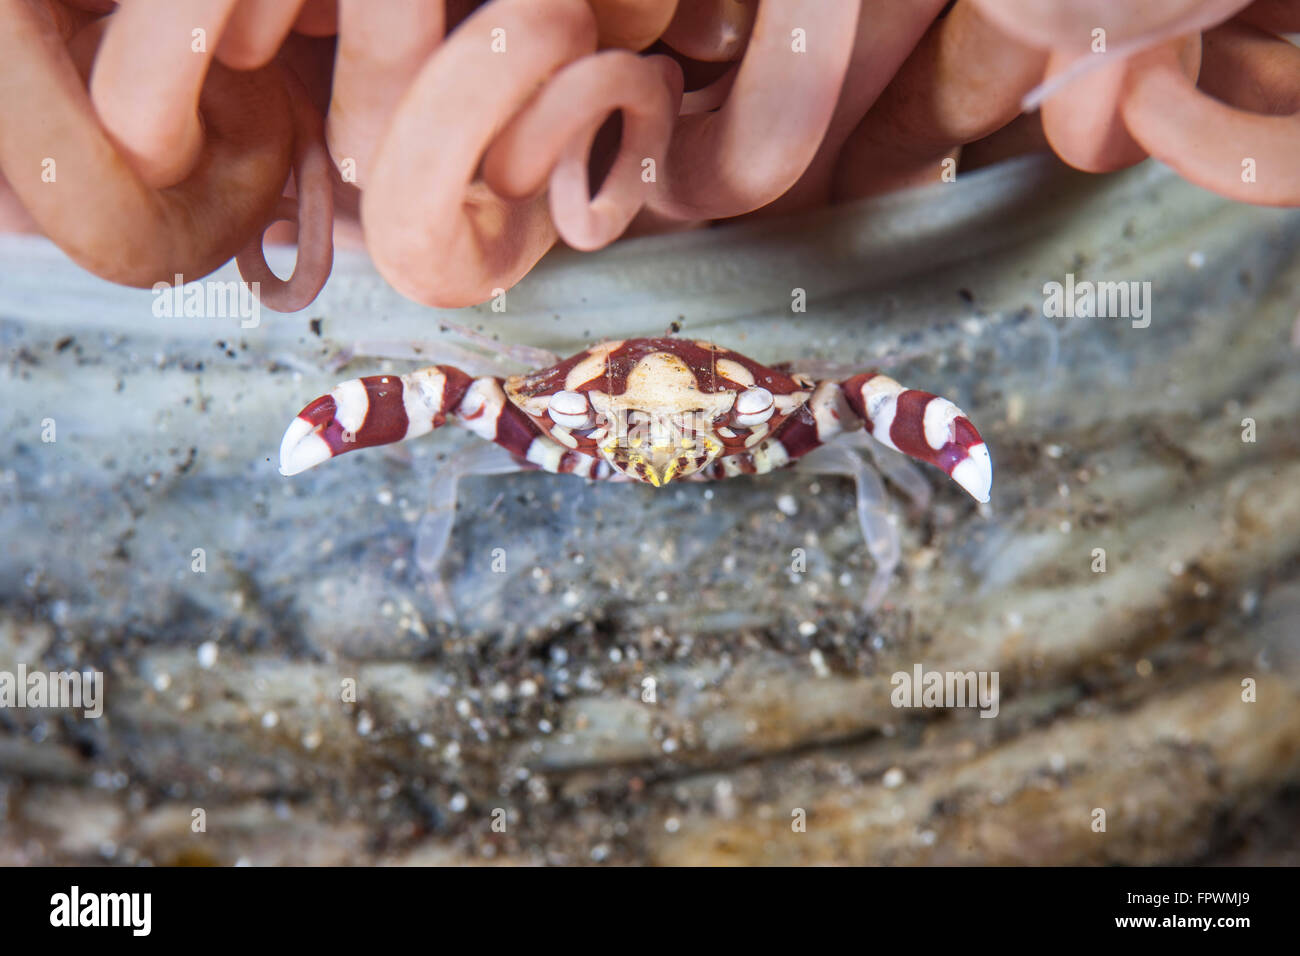 A harlequin swimming crab (Lissocarcinus laevis) sits on its host tube anemone in Komodo National Park, Indonesia. This tropical Stock Photo